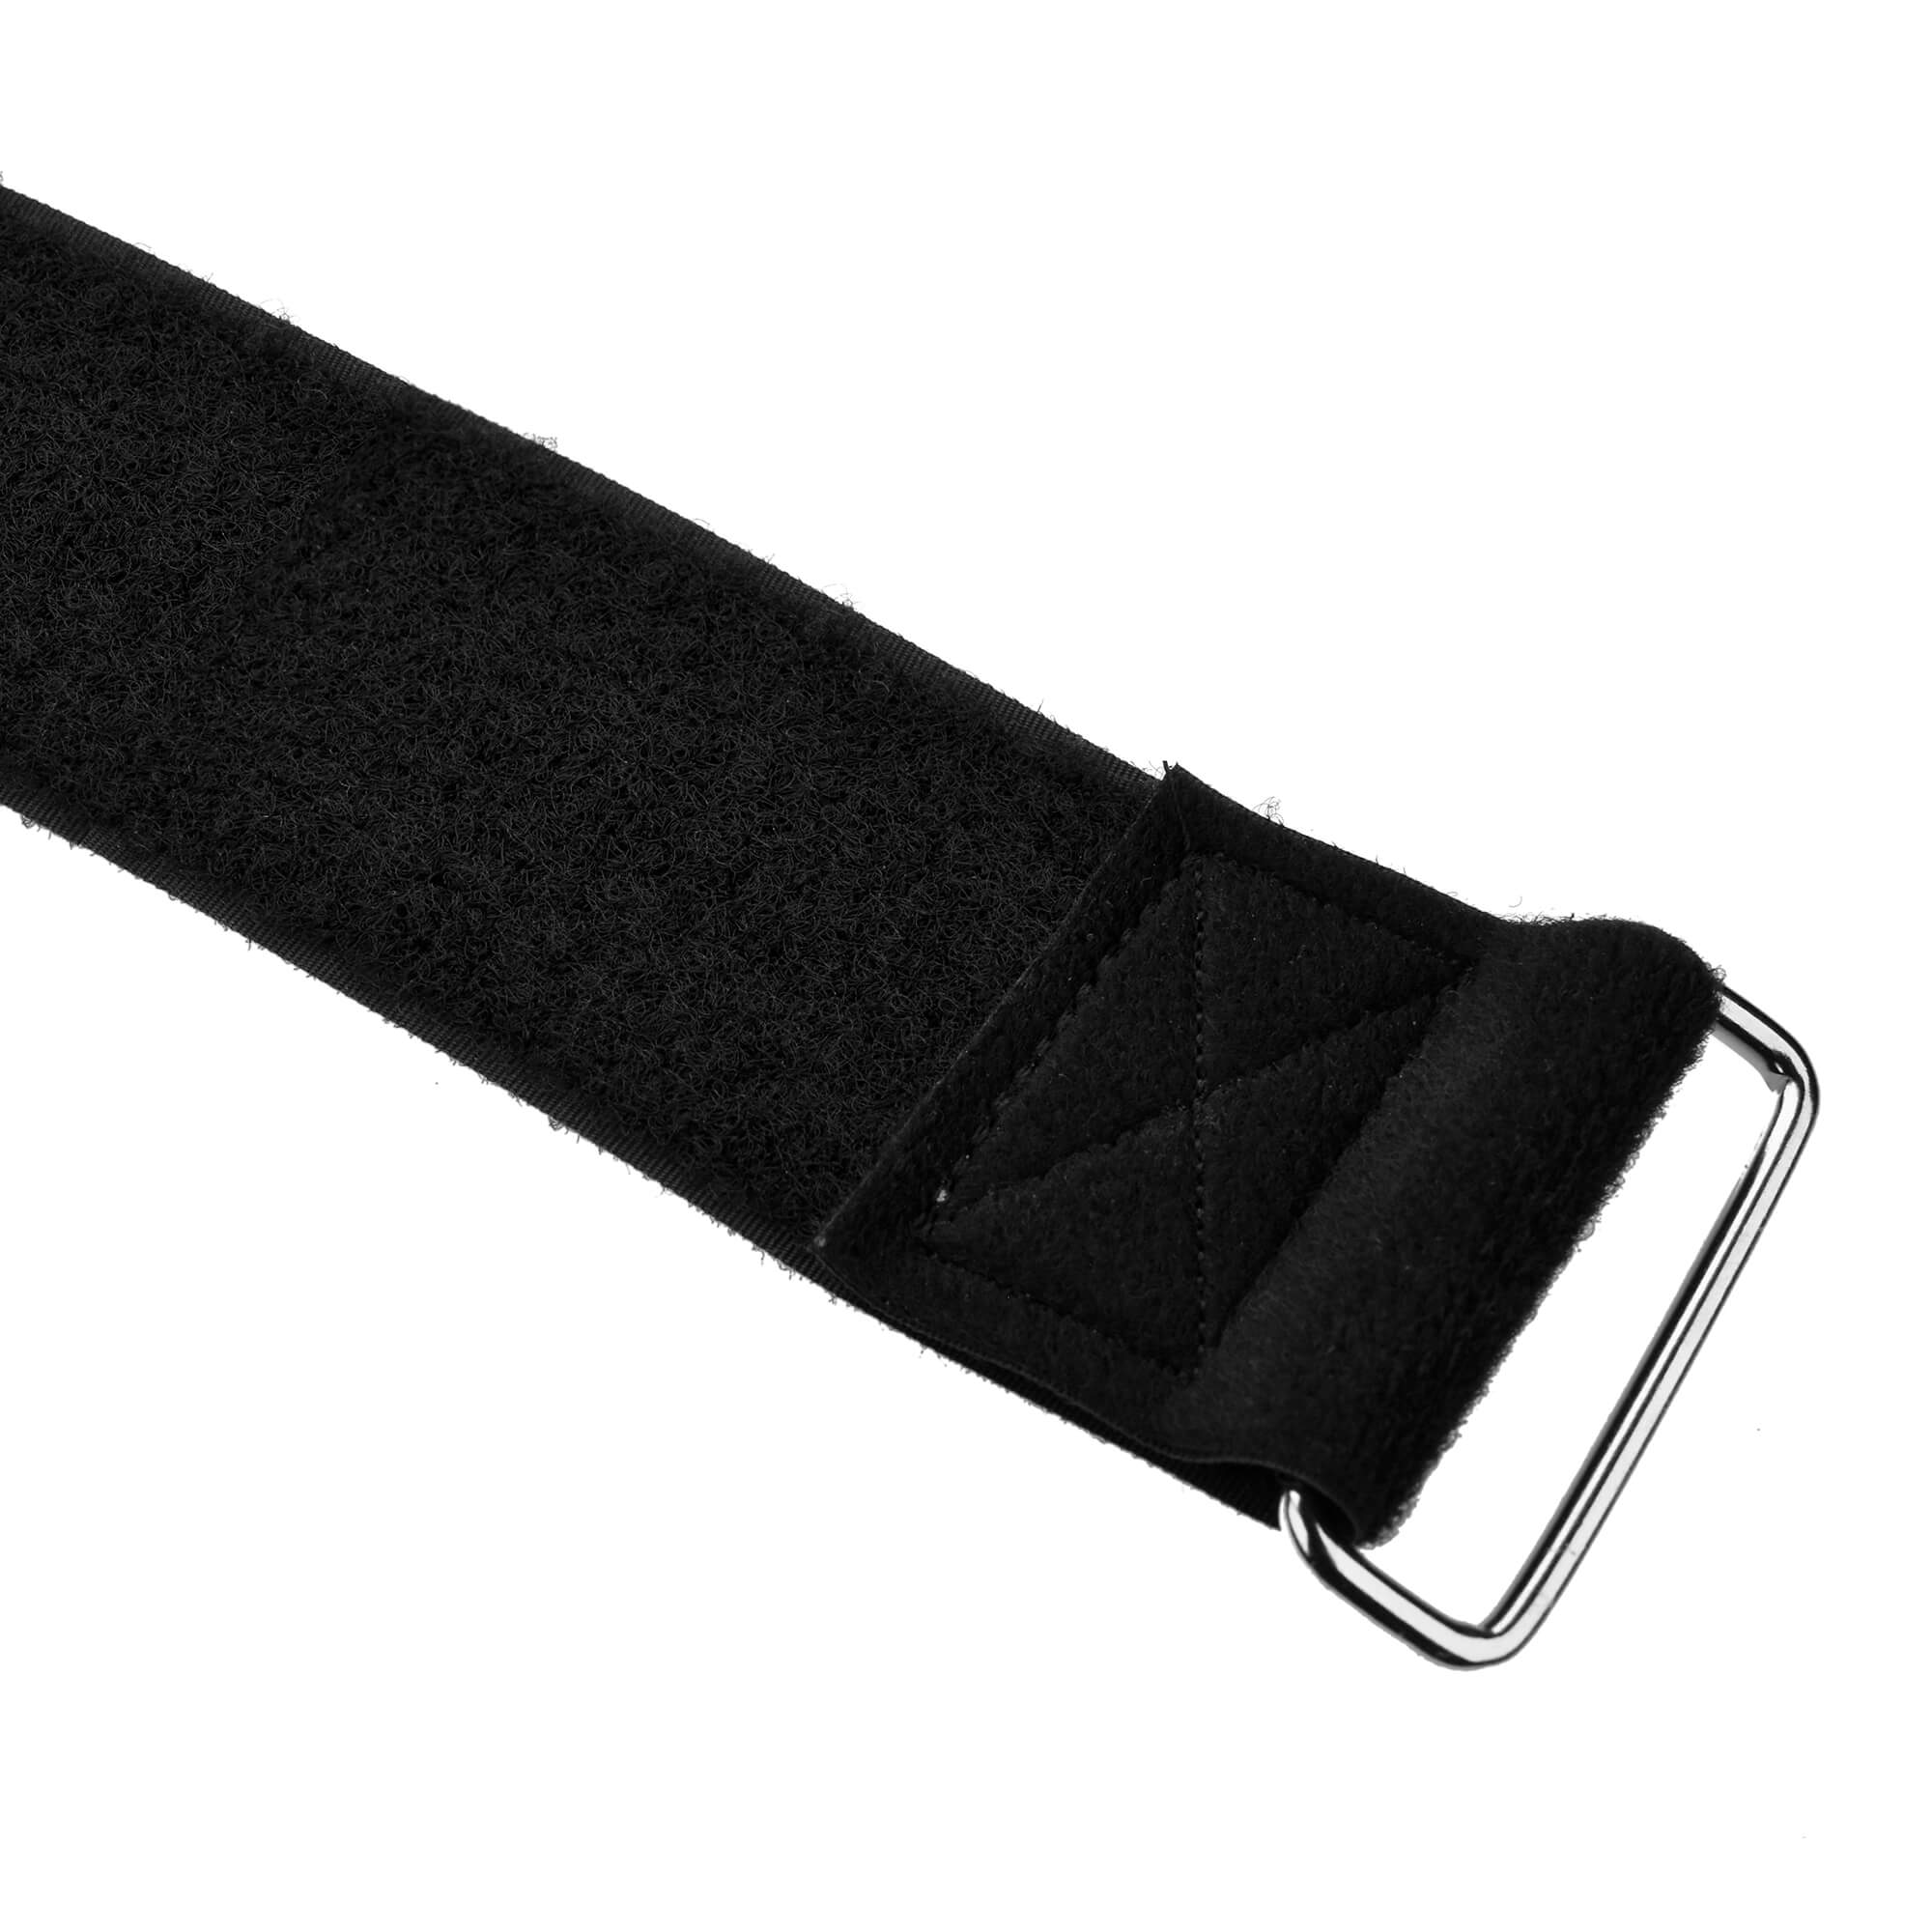 50mm Steel Buckle Strap with VELCRO® Brand Soft Velour Backed Loop